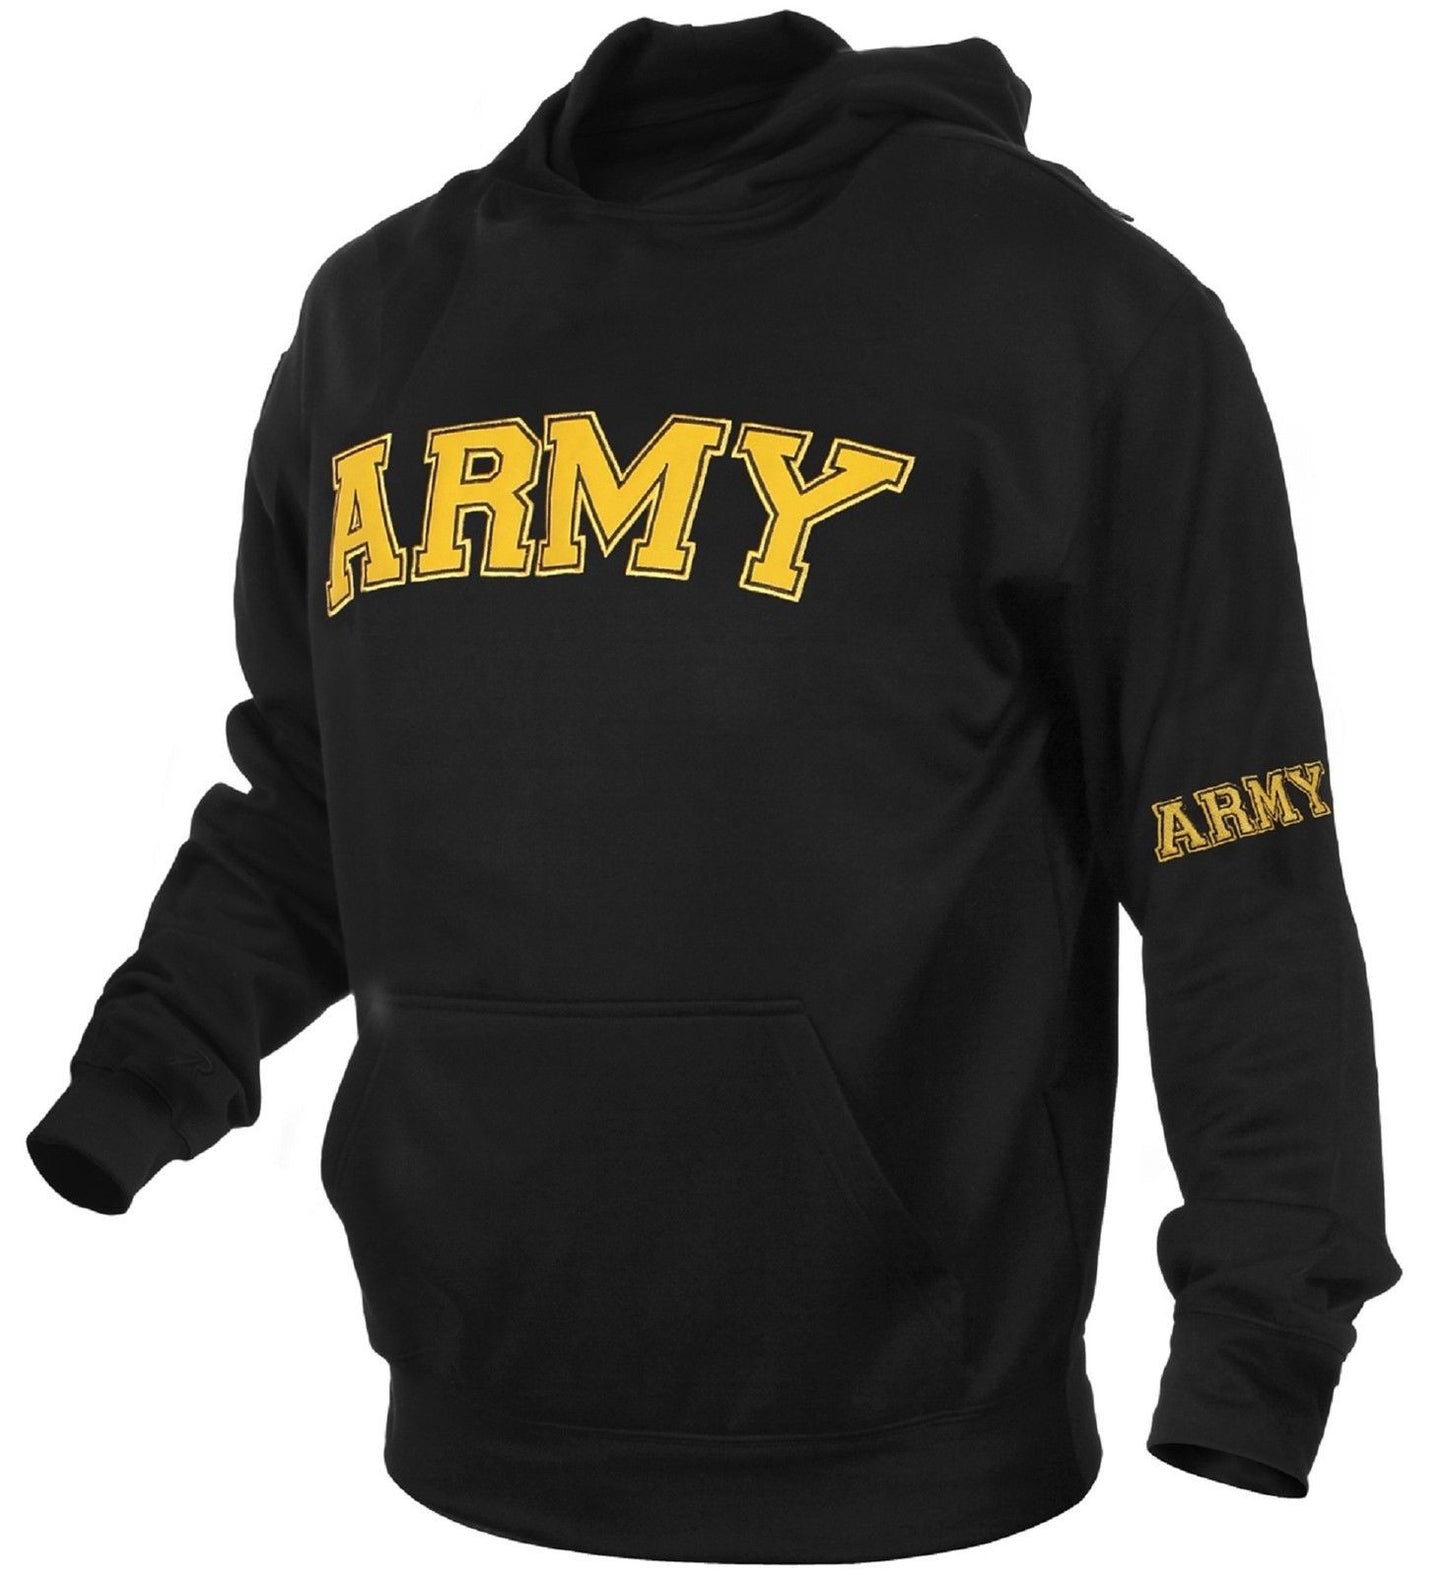 Men's Black & Gold Embroidered ARMY Pullover Hoodie Sweatshirt